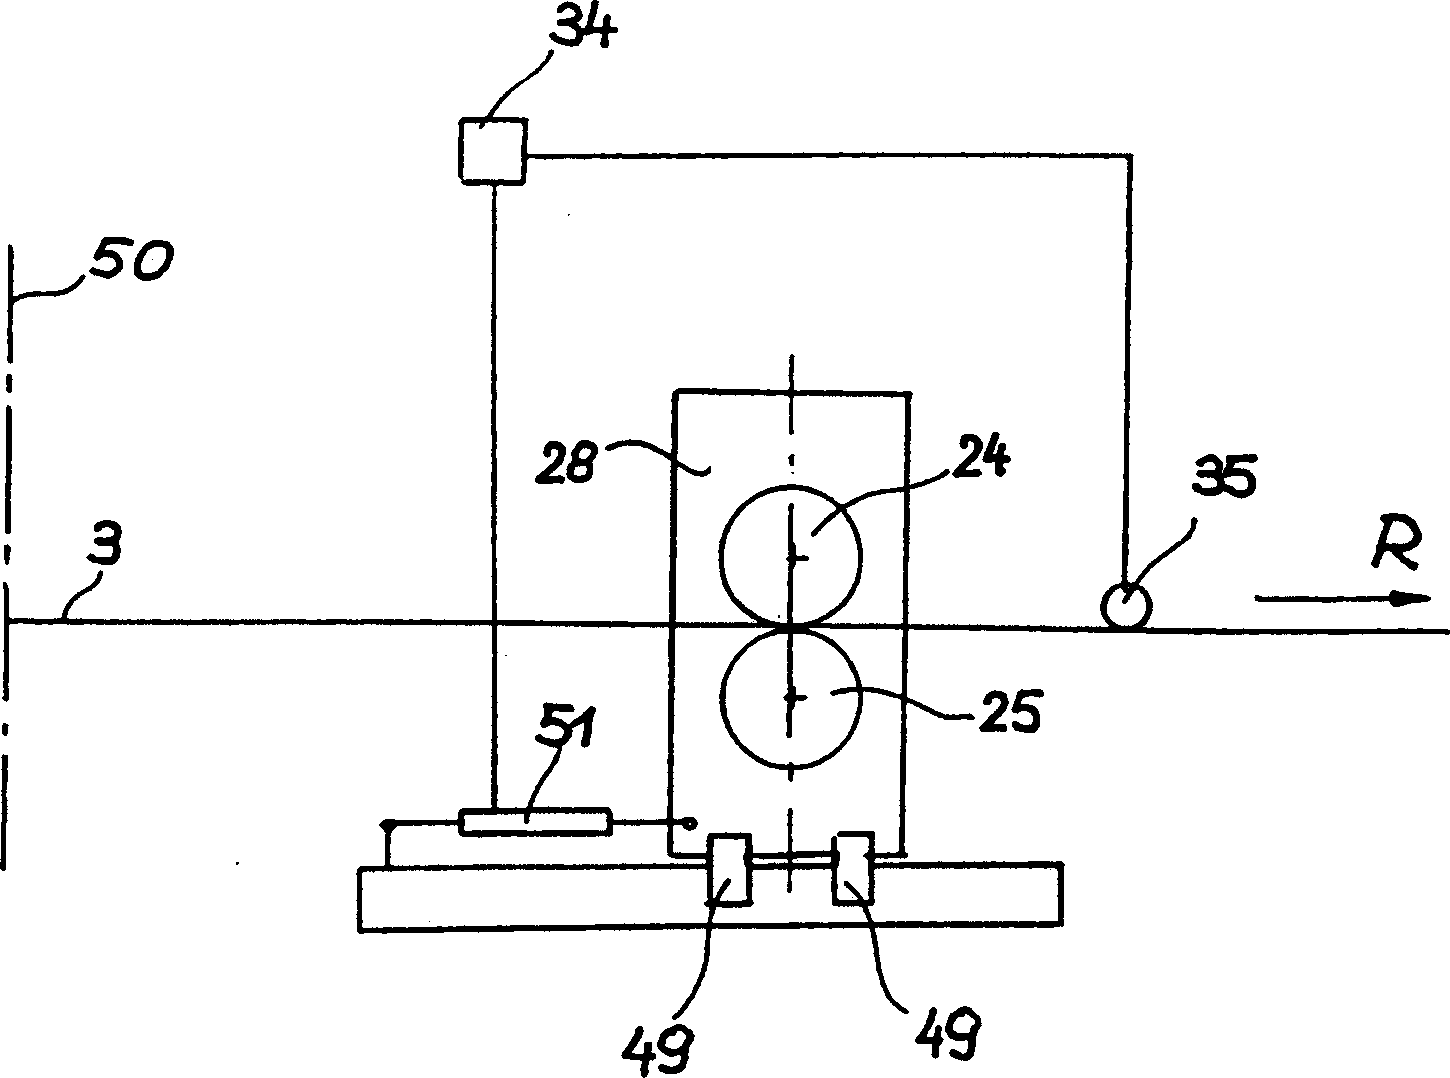 Method and equipment for continuous production of rolled metal plate from molten metal